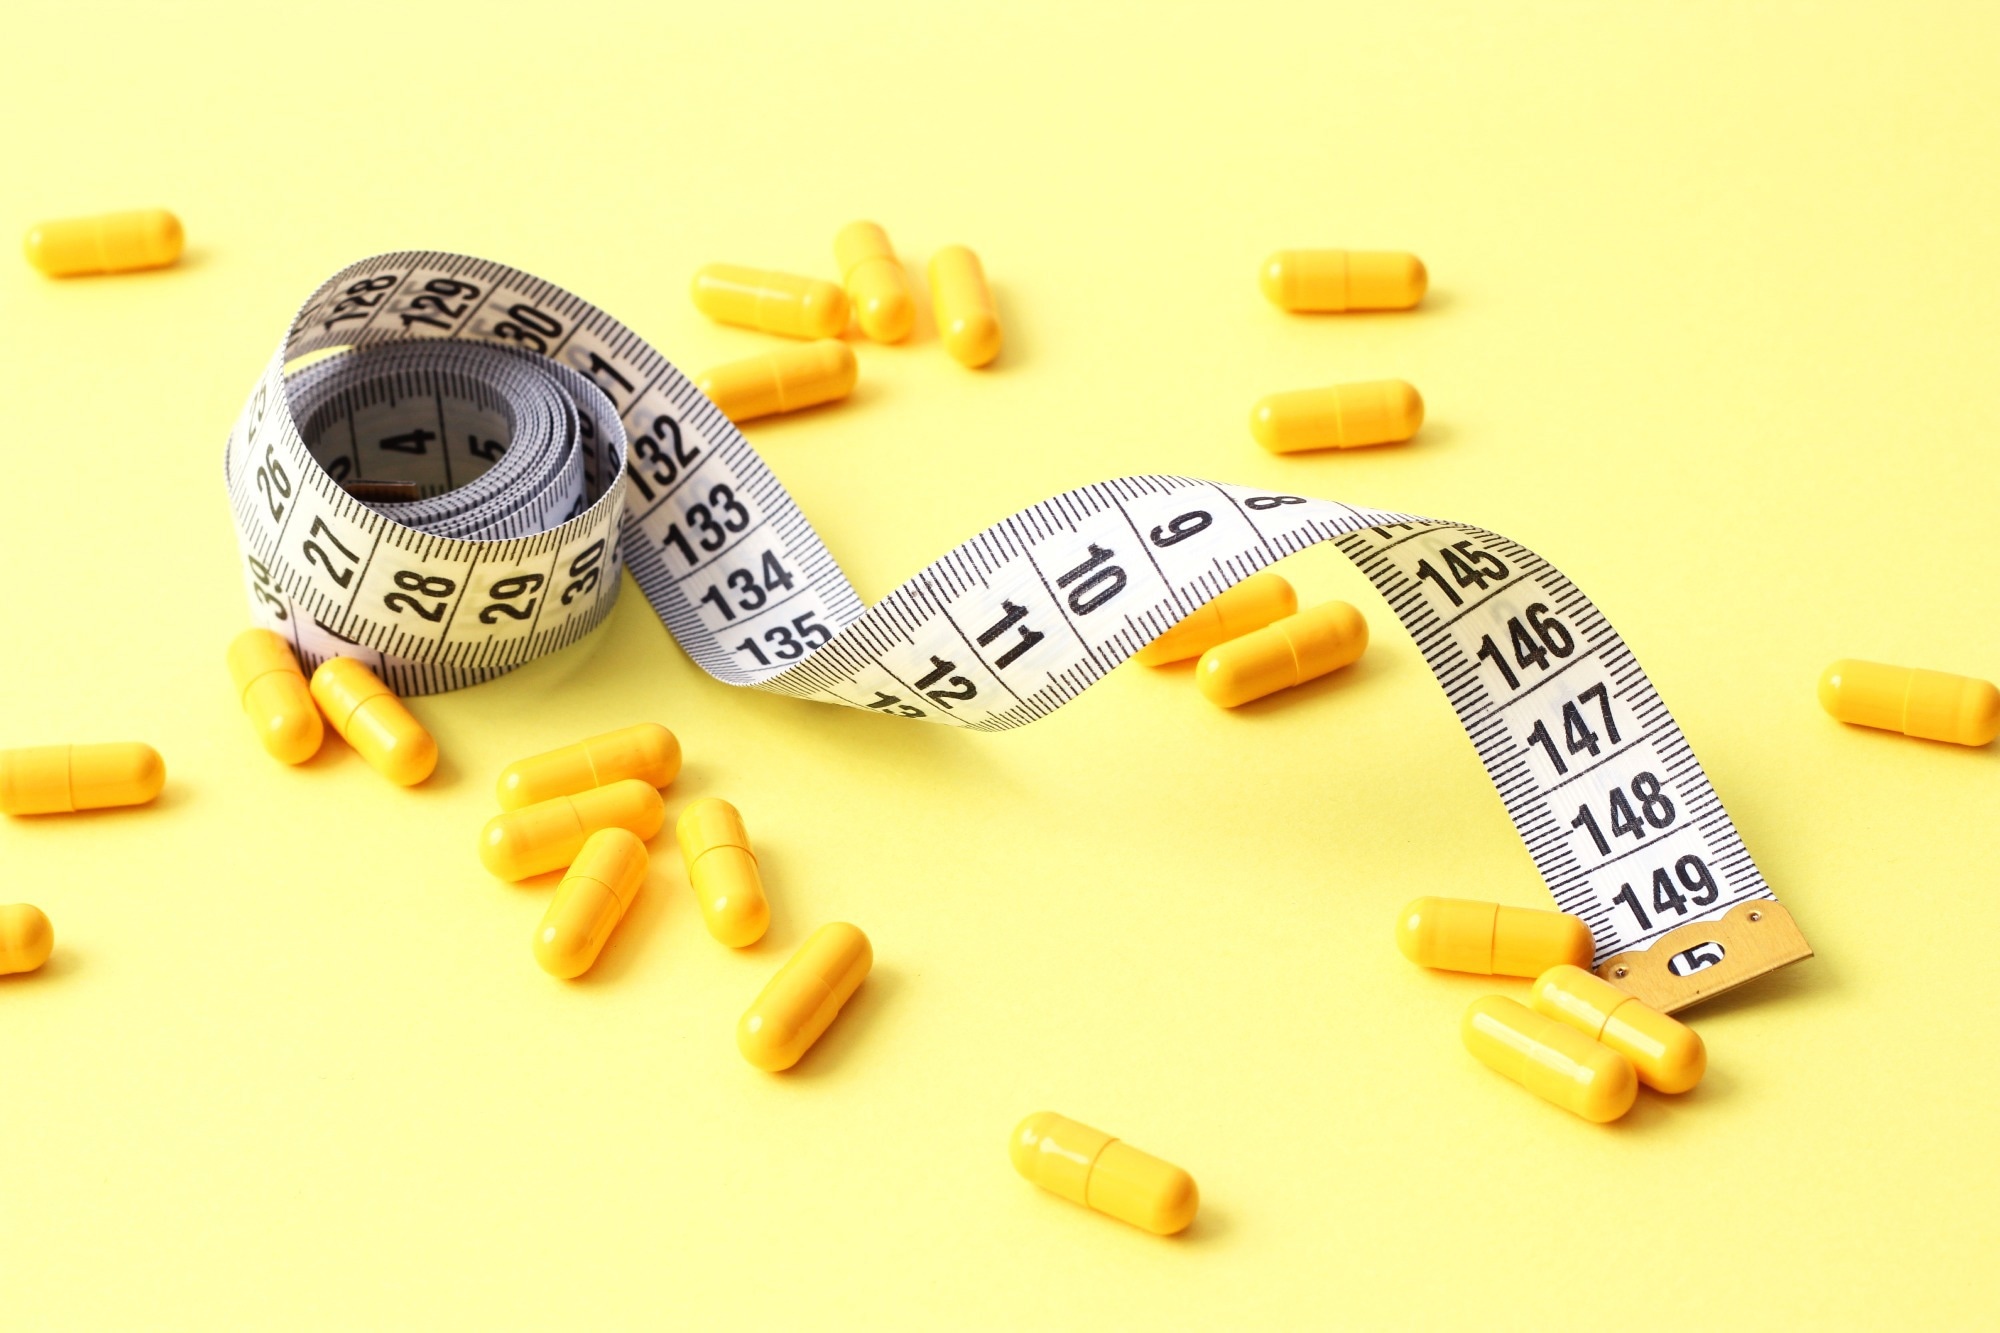 Study: A GIPR antagonist conjugated to GLP-1 analogues promotes weight loss with improved metabolic parameters in preclinical and phase 1 settings. Image Credit: White bear studio / Shutterstock